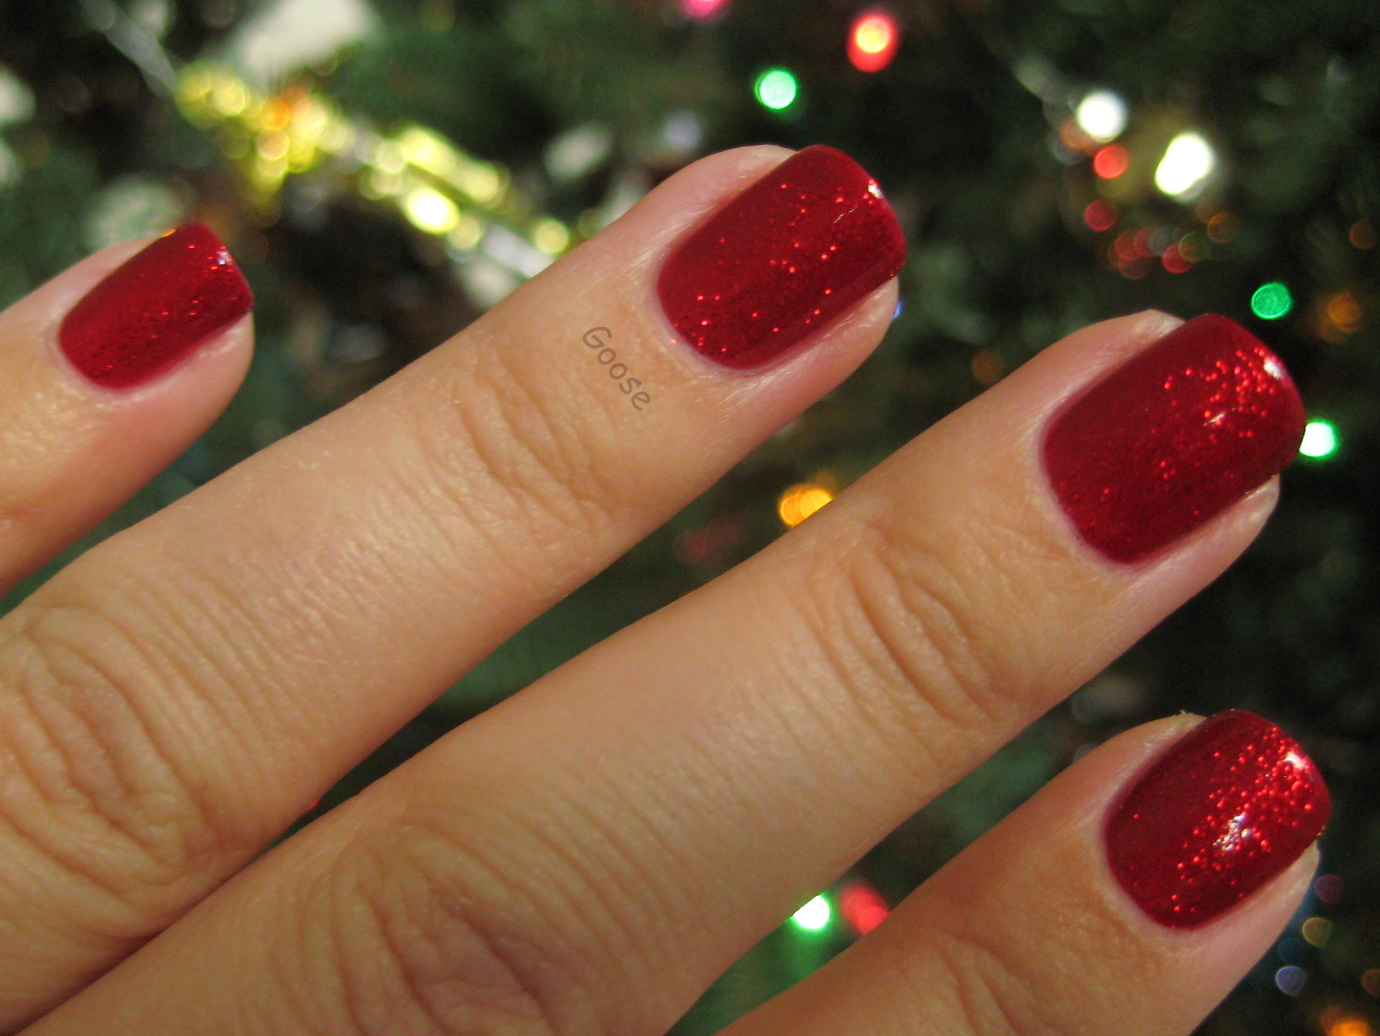 absurd Hotel pedal Goose's Glitter: Milani Ruby Jewels (China Glaze Ruby Pumps dupe)